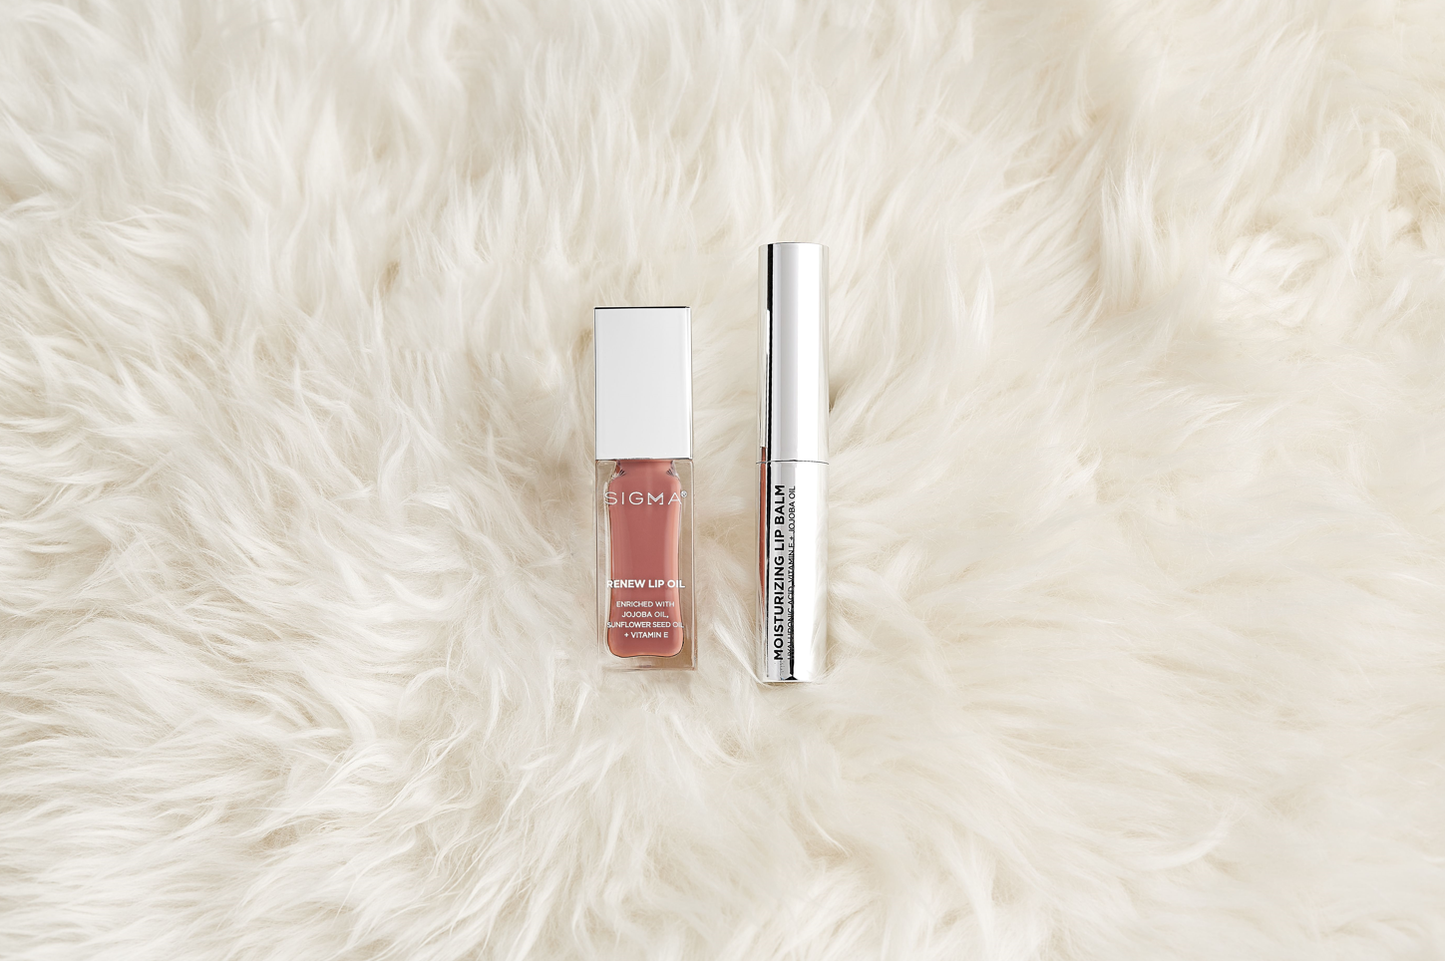 Sigma Beauty Winter Romance Wonderland Holiday Collection Snow Kissed Lip Duo